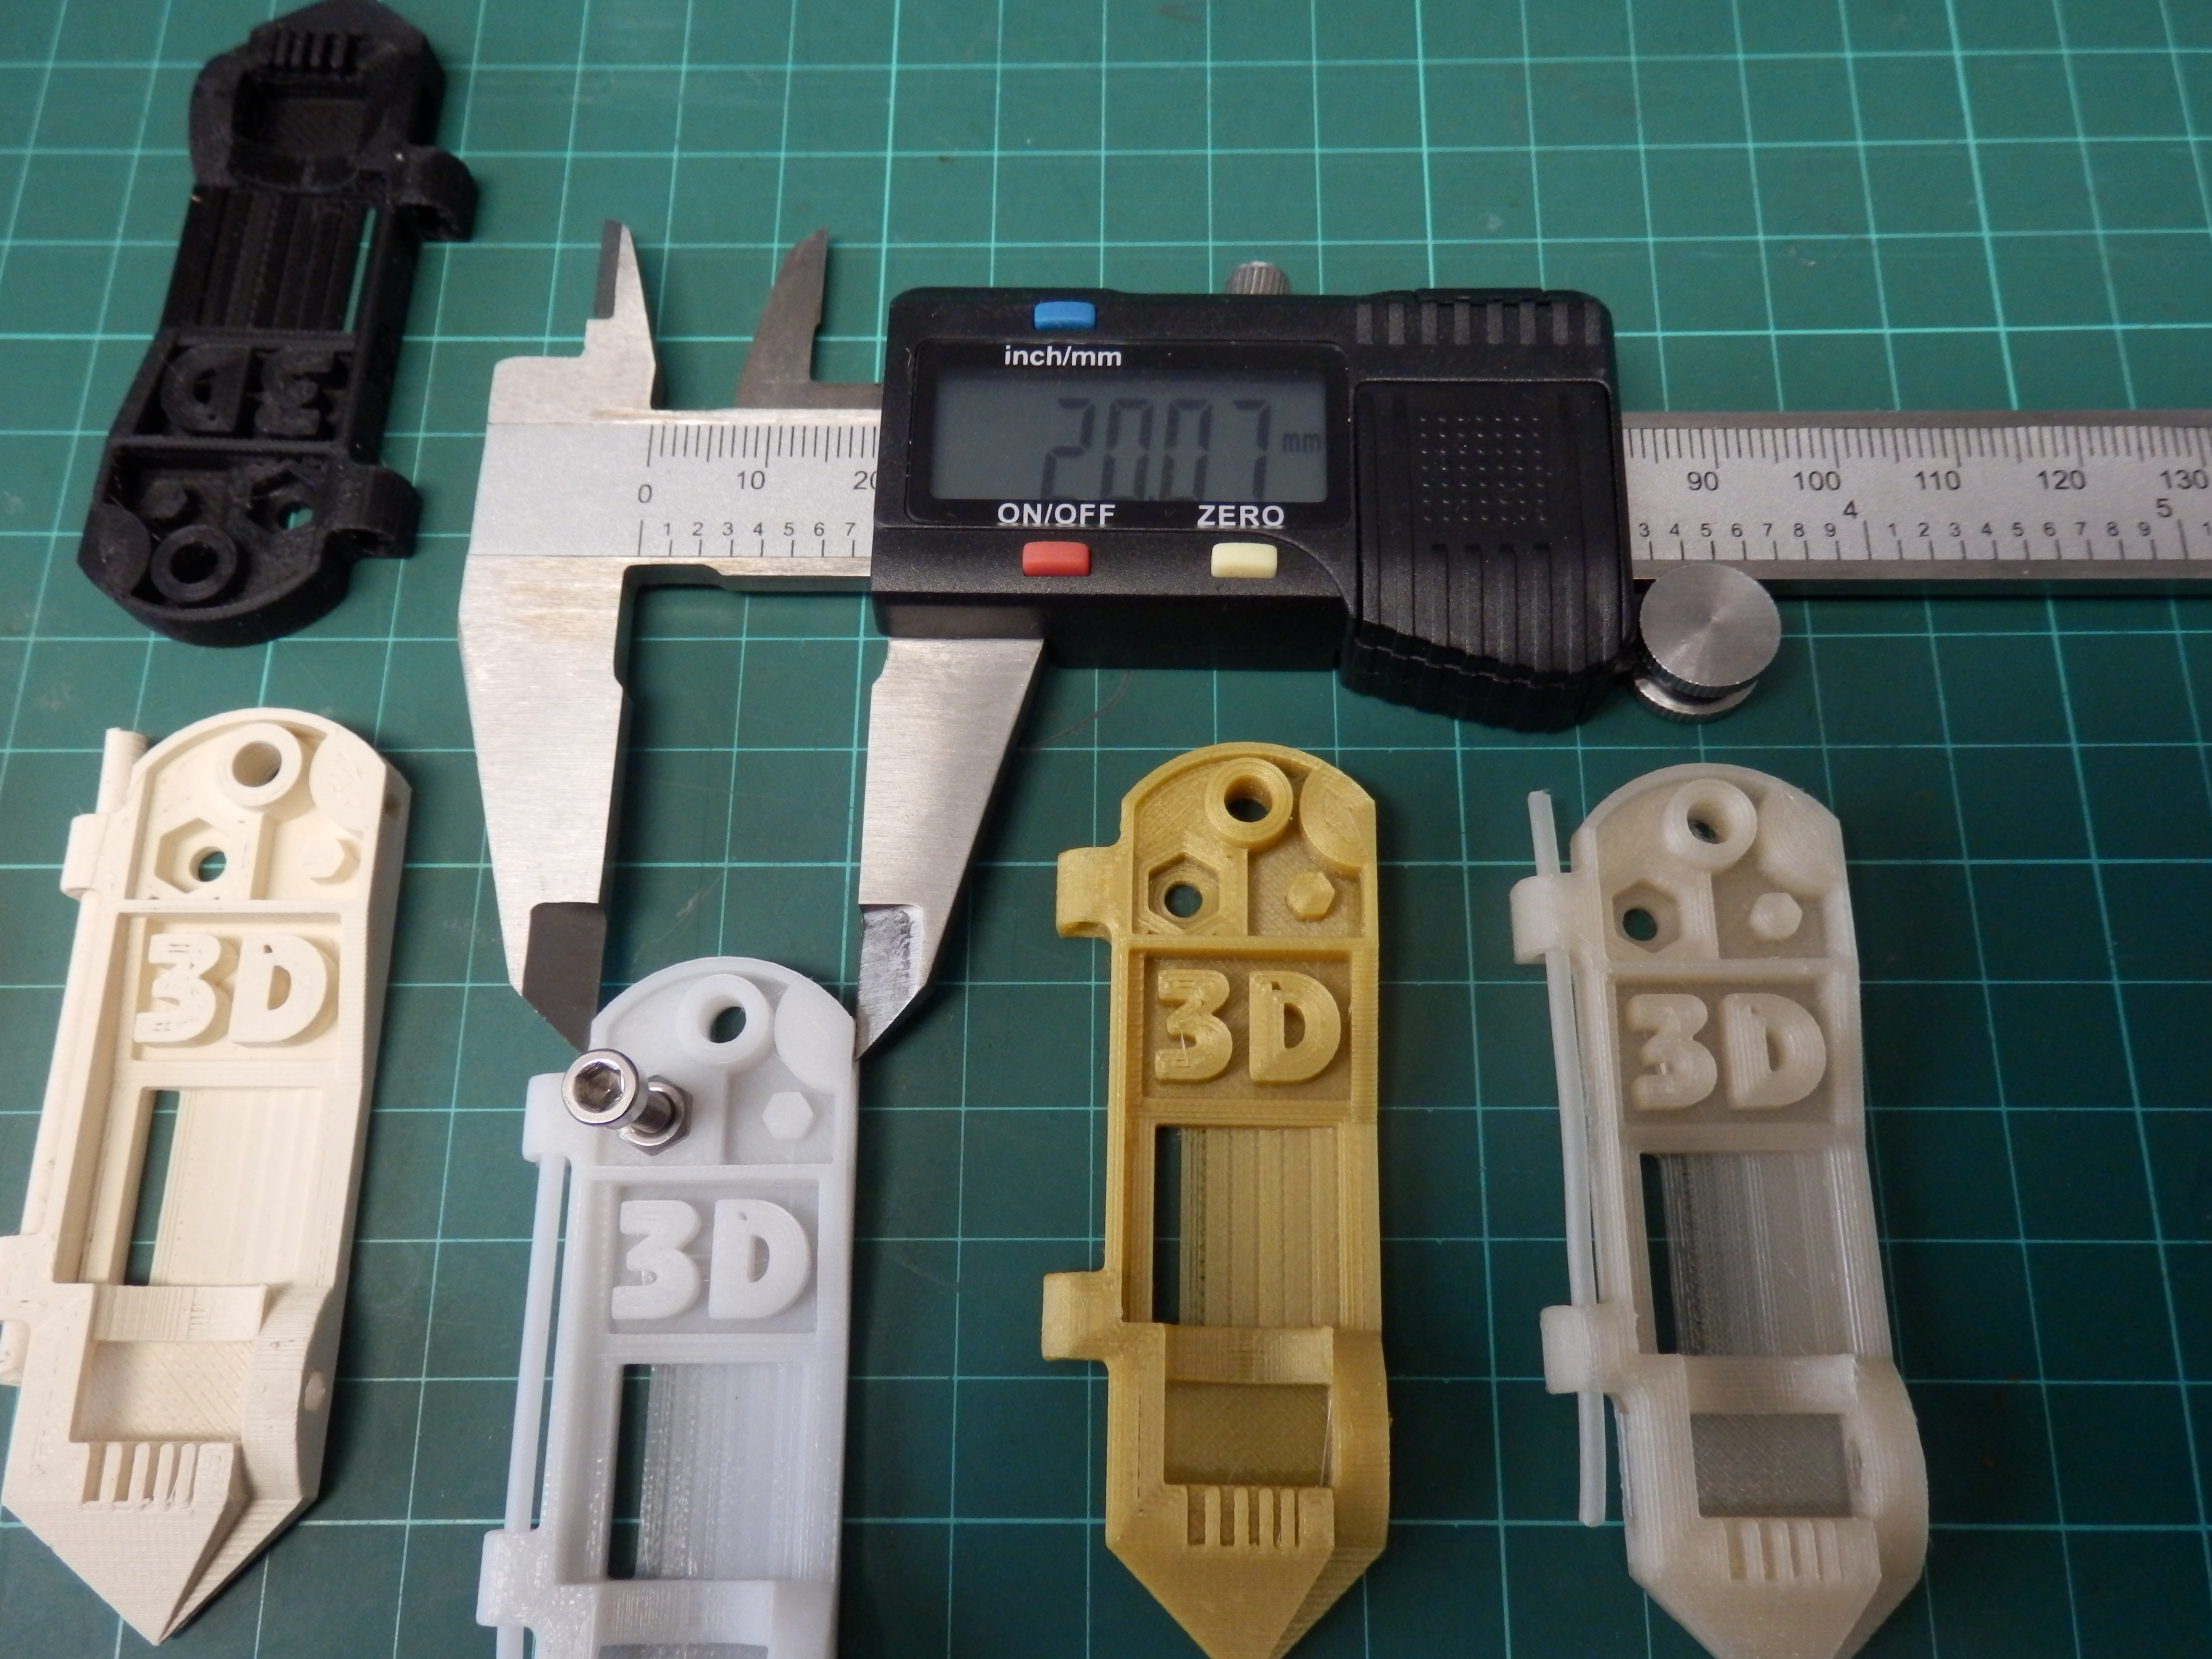 Calibration set for 3D printers, extruders and materials